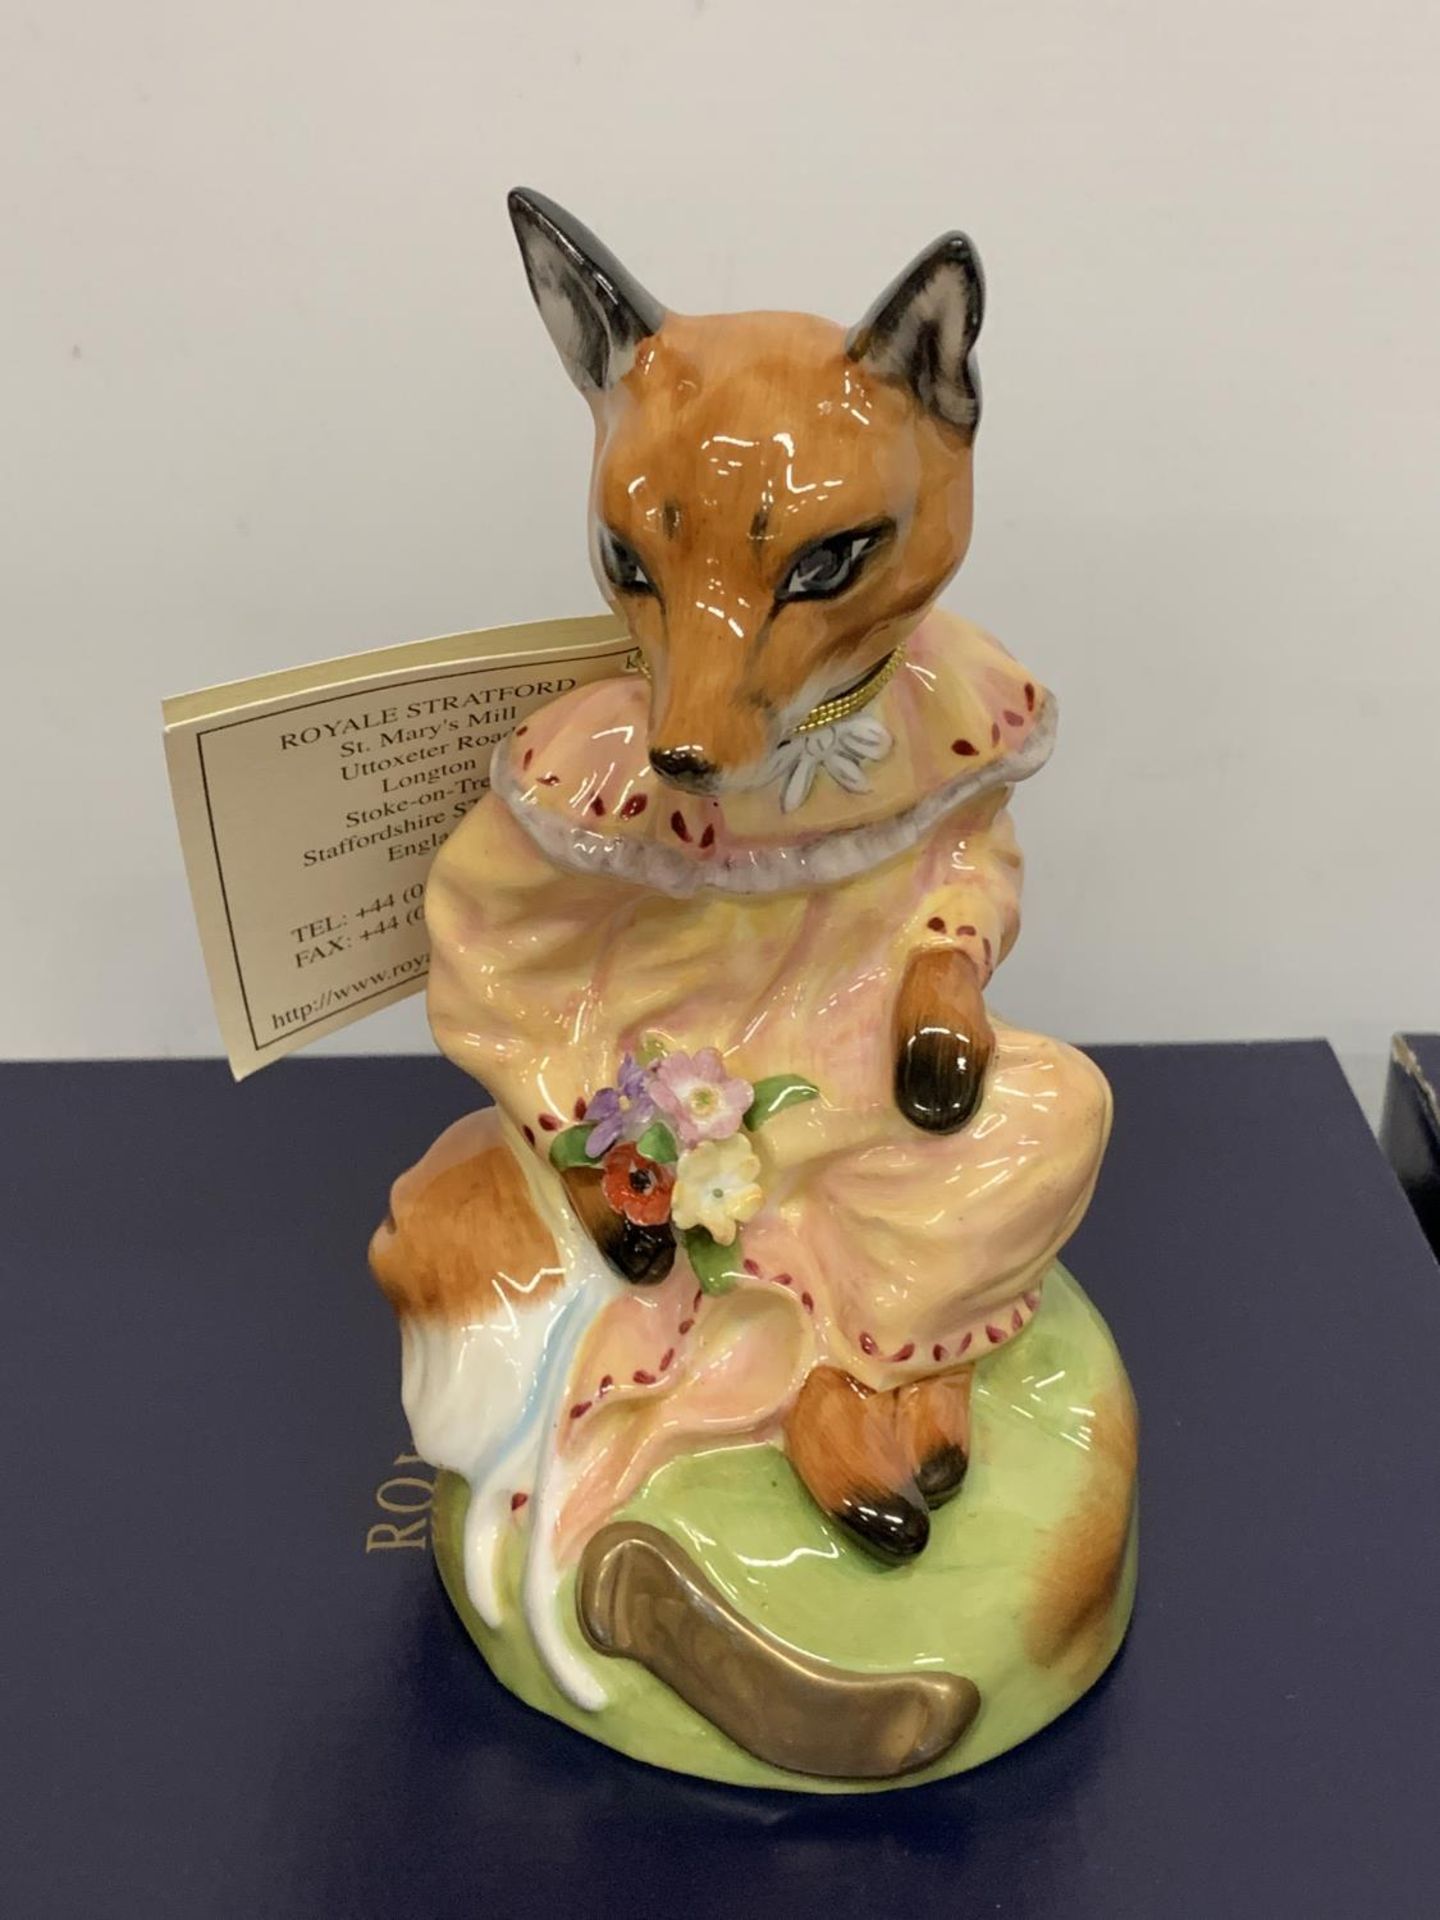 TWO HAND PAINTED AND BOXED LIMITED EDITION ROYAL STRATFORD FOX FIGURES ONE 726/2500 THE OTHER 724/ - Image 2 of 6